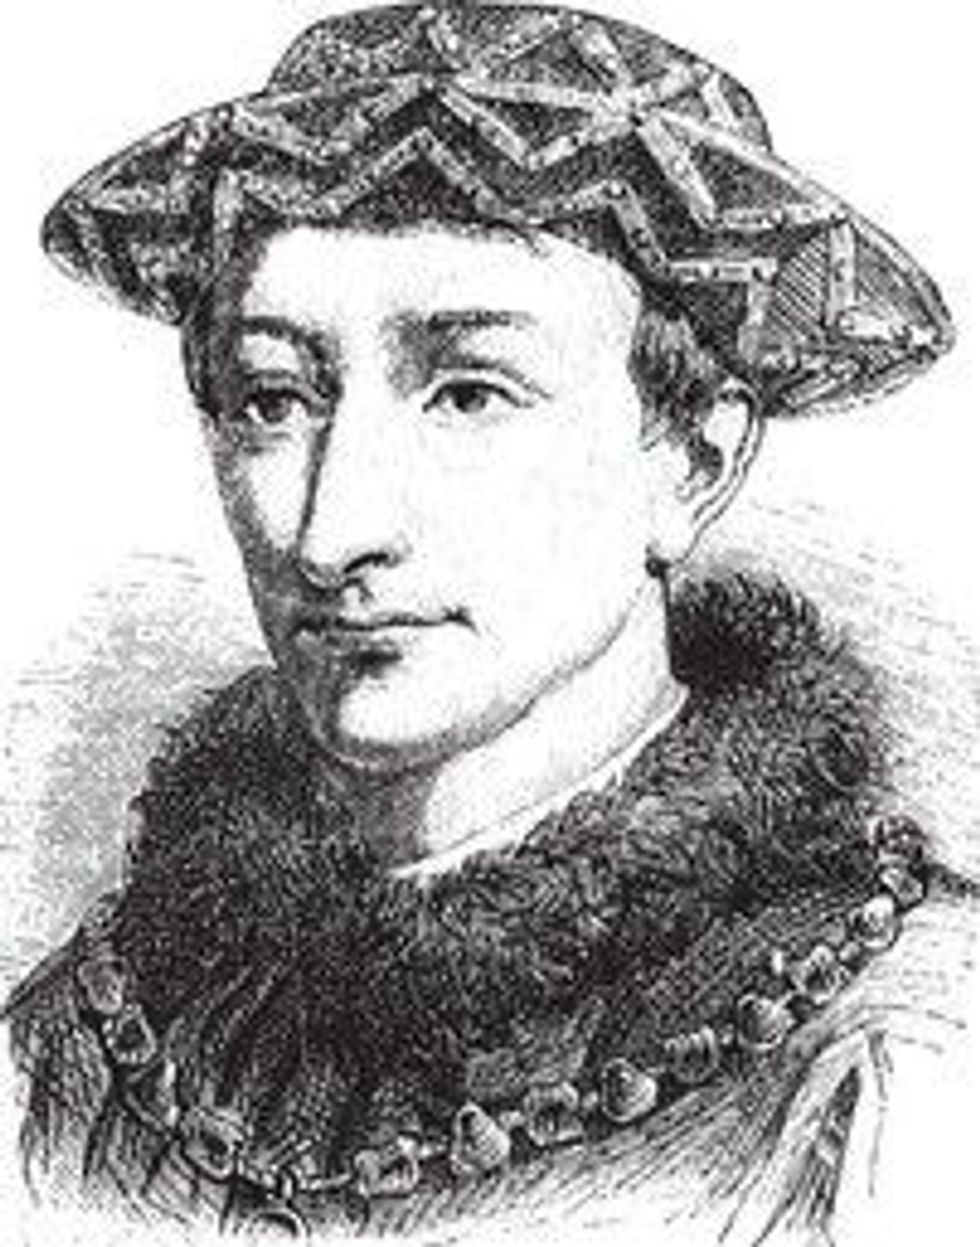 Charles VII of France was given the title of Dauphin at the age of 14.